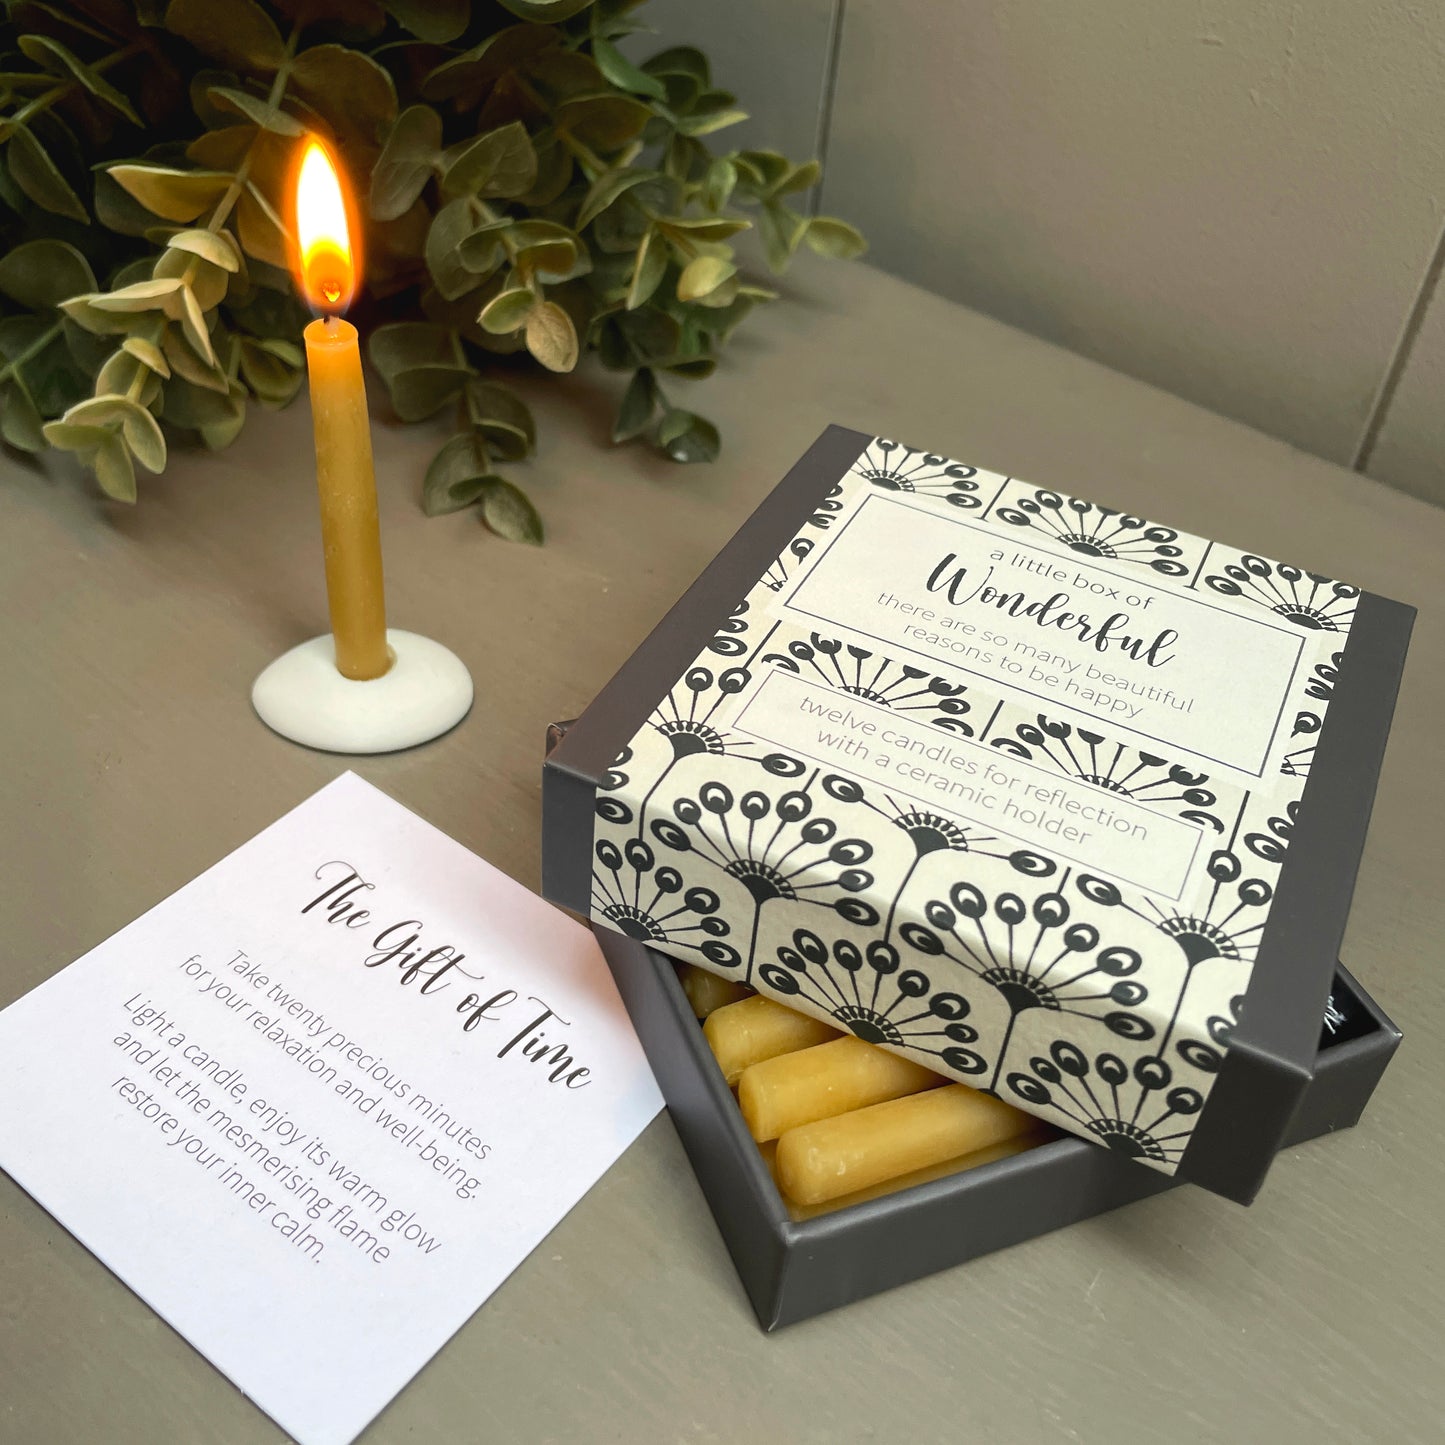 Cotton & Grey A Little Box Of Wonderful Candles Happy Flames Candle Gift Idea